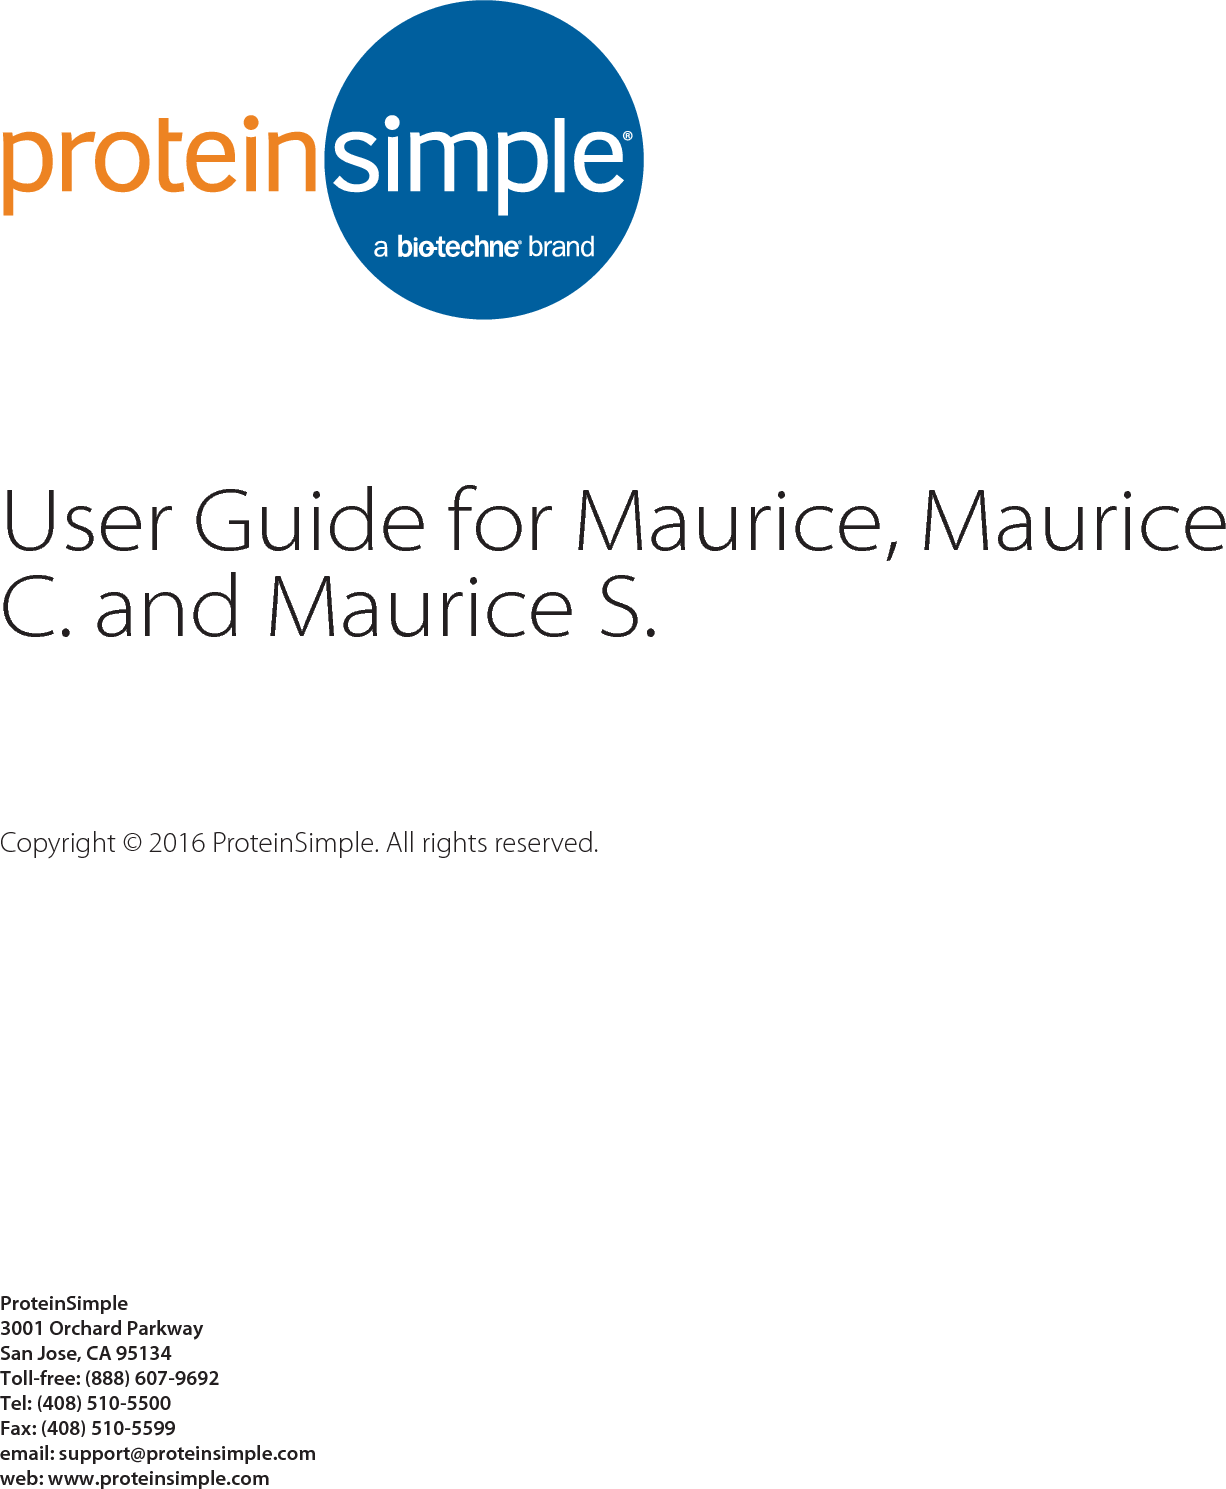 page 1User Guide for Maurice, Maurice C. and Maurice S.Copyright © 2016 ProteinSimple. All rights reserved.ProteinSimple3001 Orchard ParkwaySan Jose, CA 95134Toll-free: (888) 607-9692Tel: (408) 510-5500Fax: (408) 510-5599email: support@proteinsimple.comweb: www.proteinsimple.com